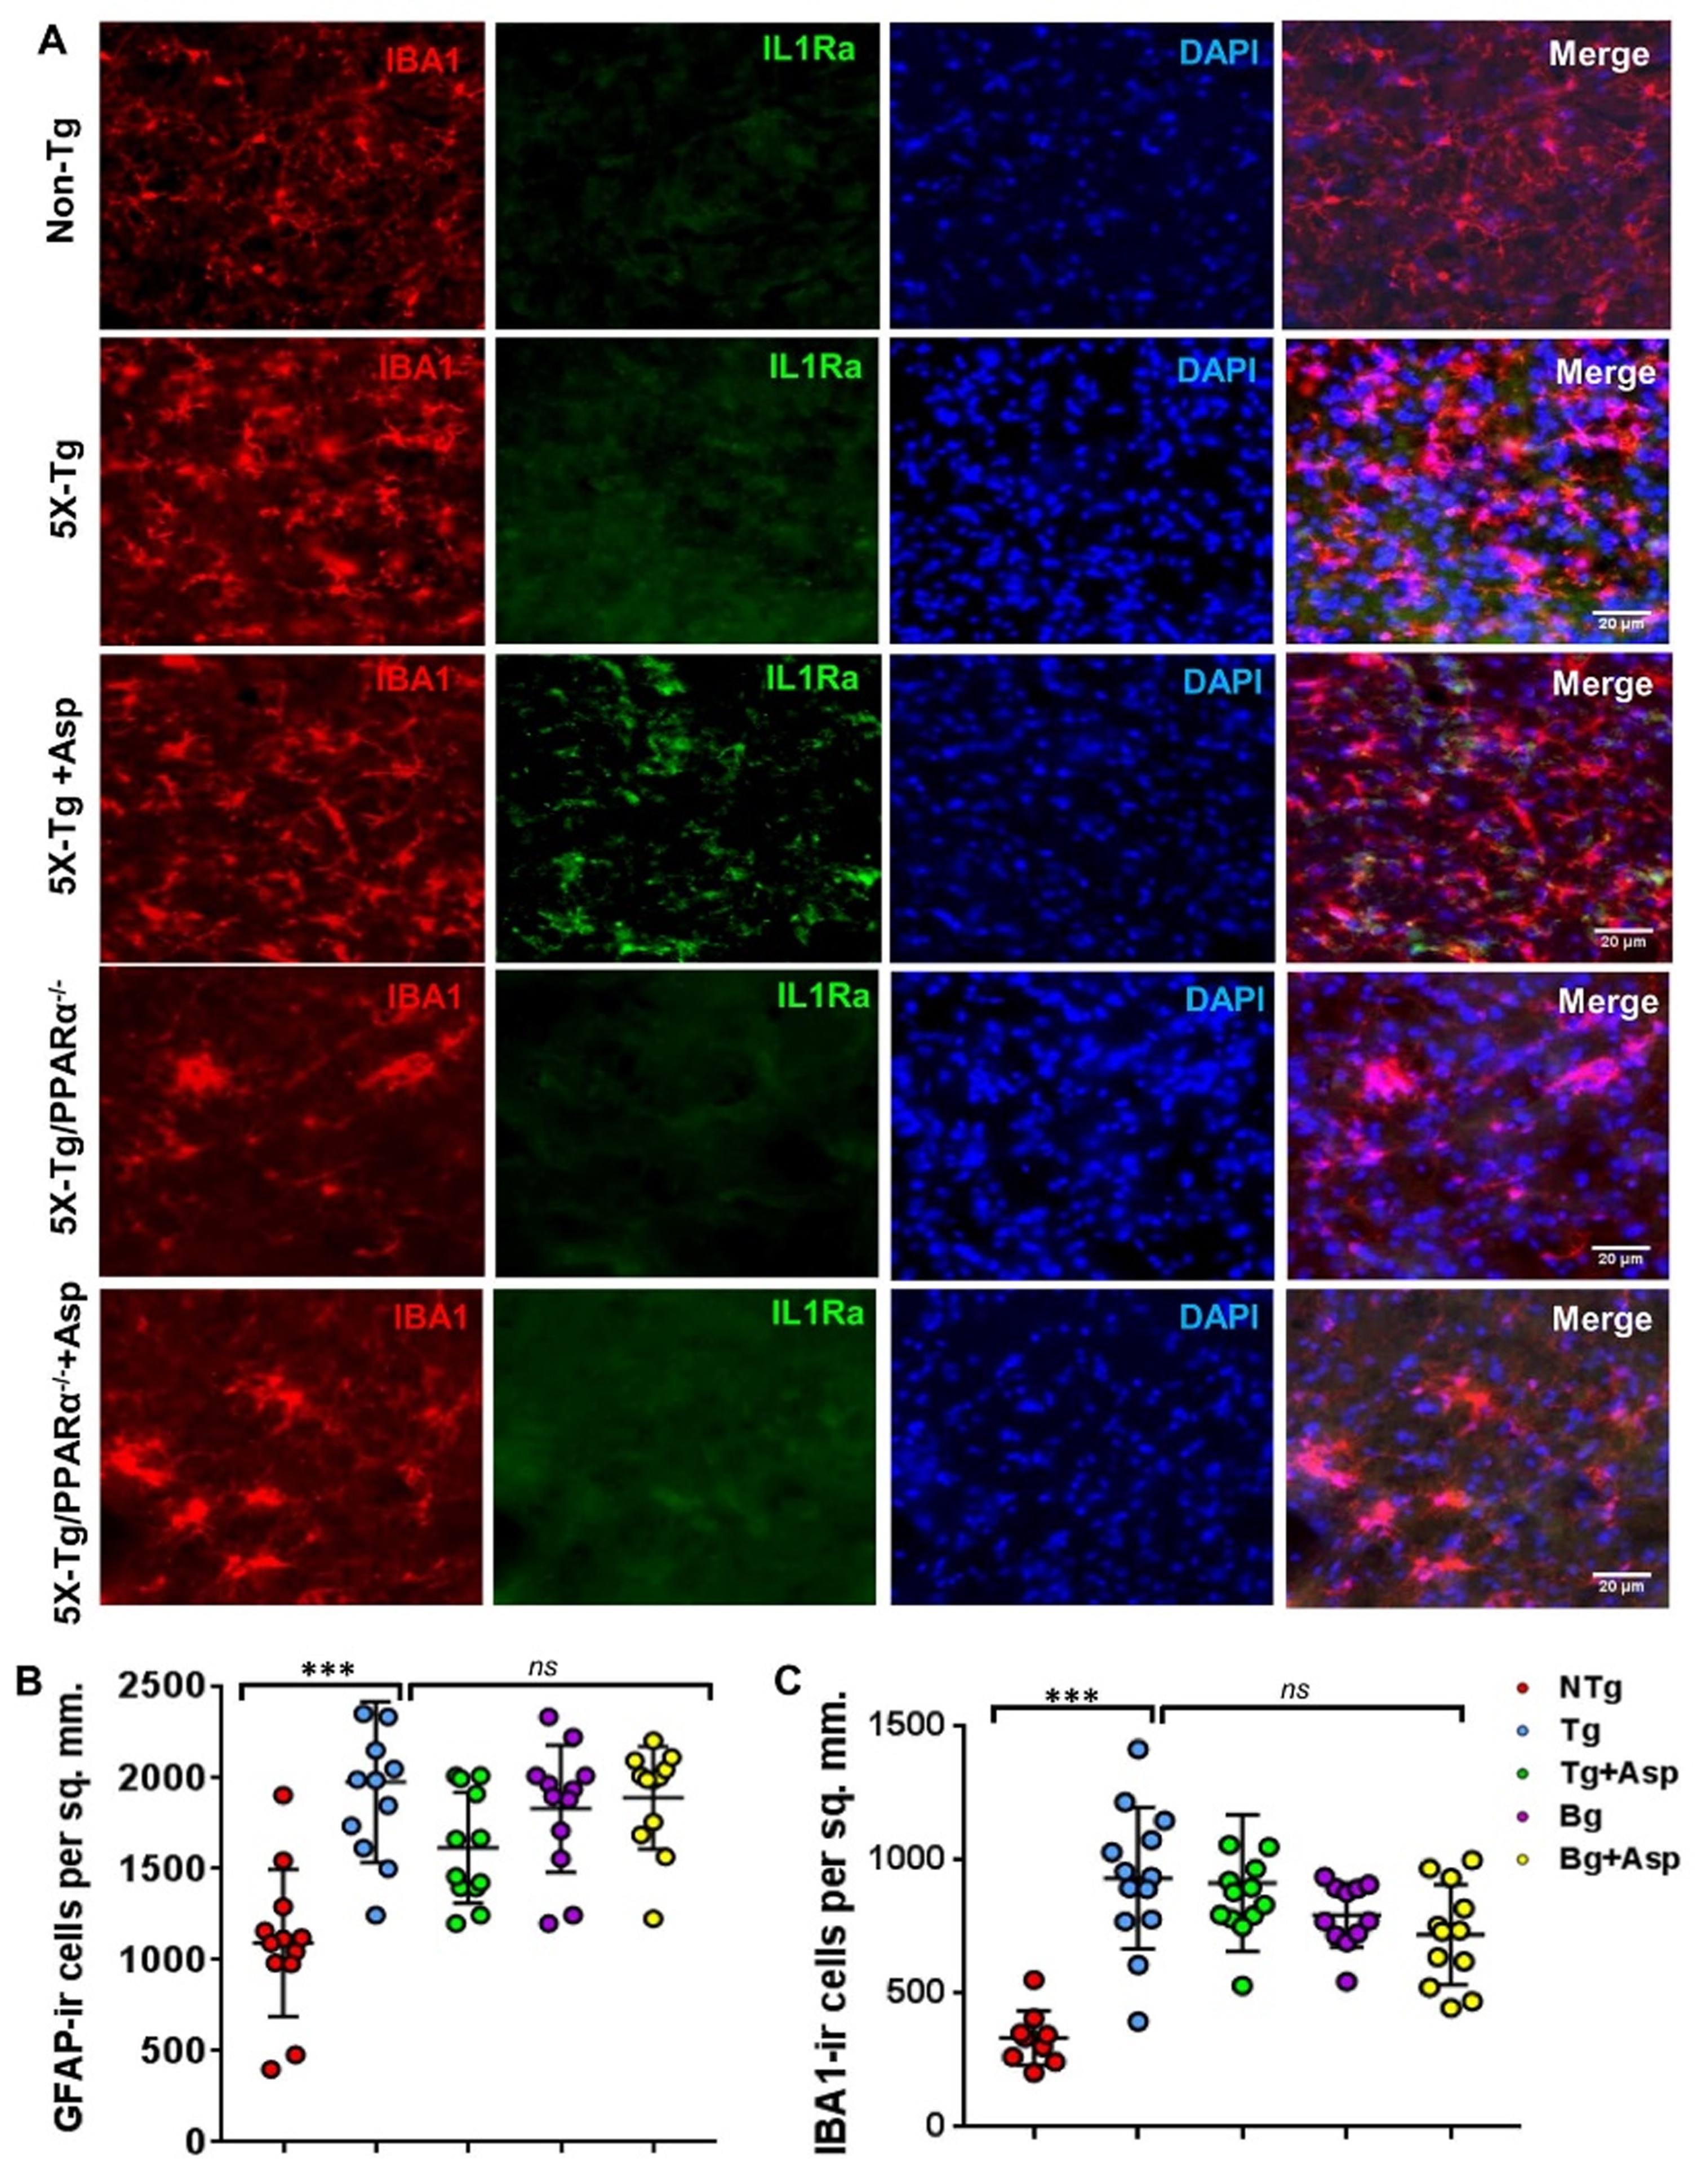 Aspirin upregulates IL-1Ra in vivo in cortical microglia of 5XFAD mice via PPARα. Six-month old 5xFAD and 5xFAD/PPARα–/–mice (n = 5 or 6 per group) were treated with aspirin (2 mg/kg bodyweight/d) orally via gavage for 30 d followed by double-labeling of cortical sections for IL-1Ra and Iba1 (A). GFAP positive cells (B) and Iba1 positive cells (C) were counted in one section (two images per section) of each of five or six mice per group and results were analyzed by one-way ANOVA. ***p≤0.001.